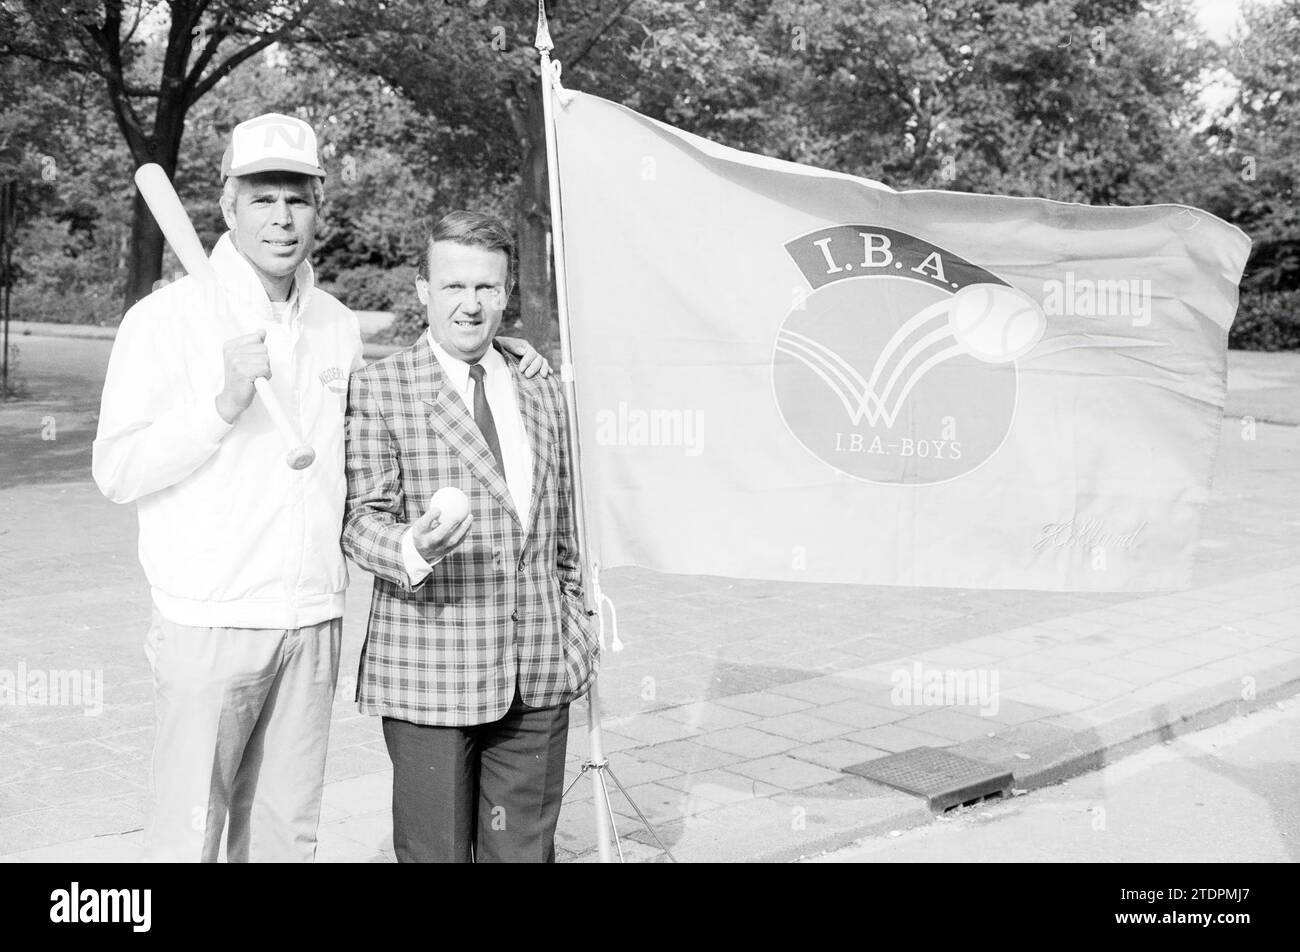 Two men with flag I.B.A. Boys (baseball), 20-08-1986, Whizgle News from the Past, Tailored for the Future. Explore historical narratives, Dutch The Netherlands agency image with a modern perspective, bridging the gap between yesterday's events and tomorrow's insights. A timeless journey shaping the stories that shape our future Stock Photo